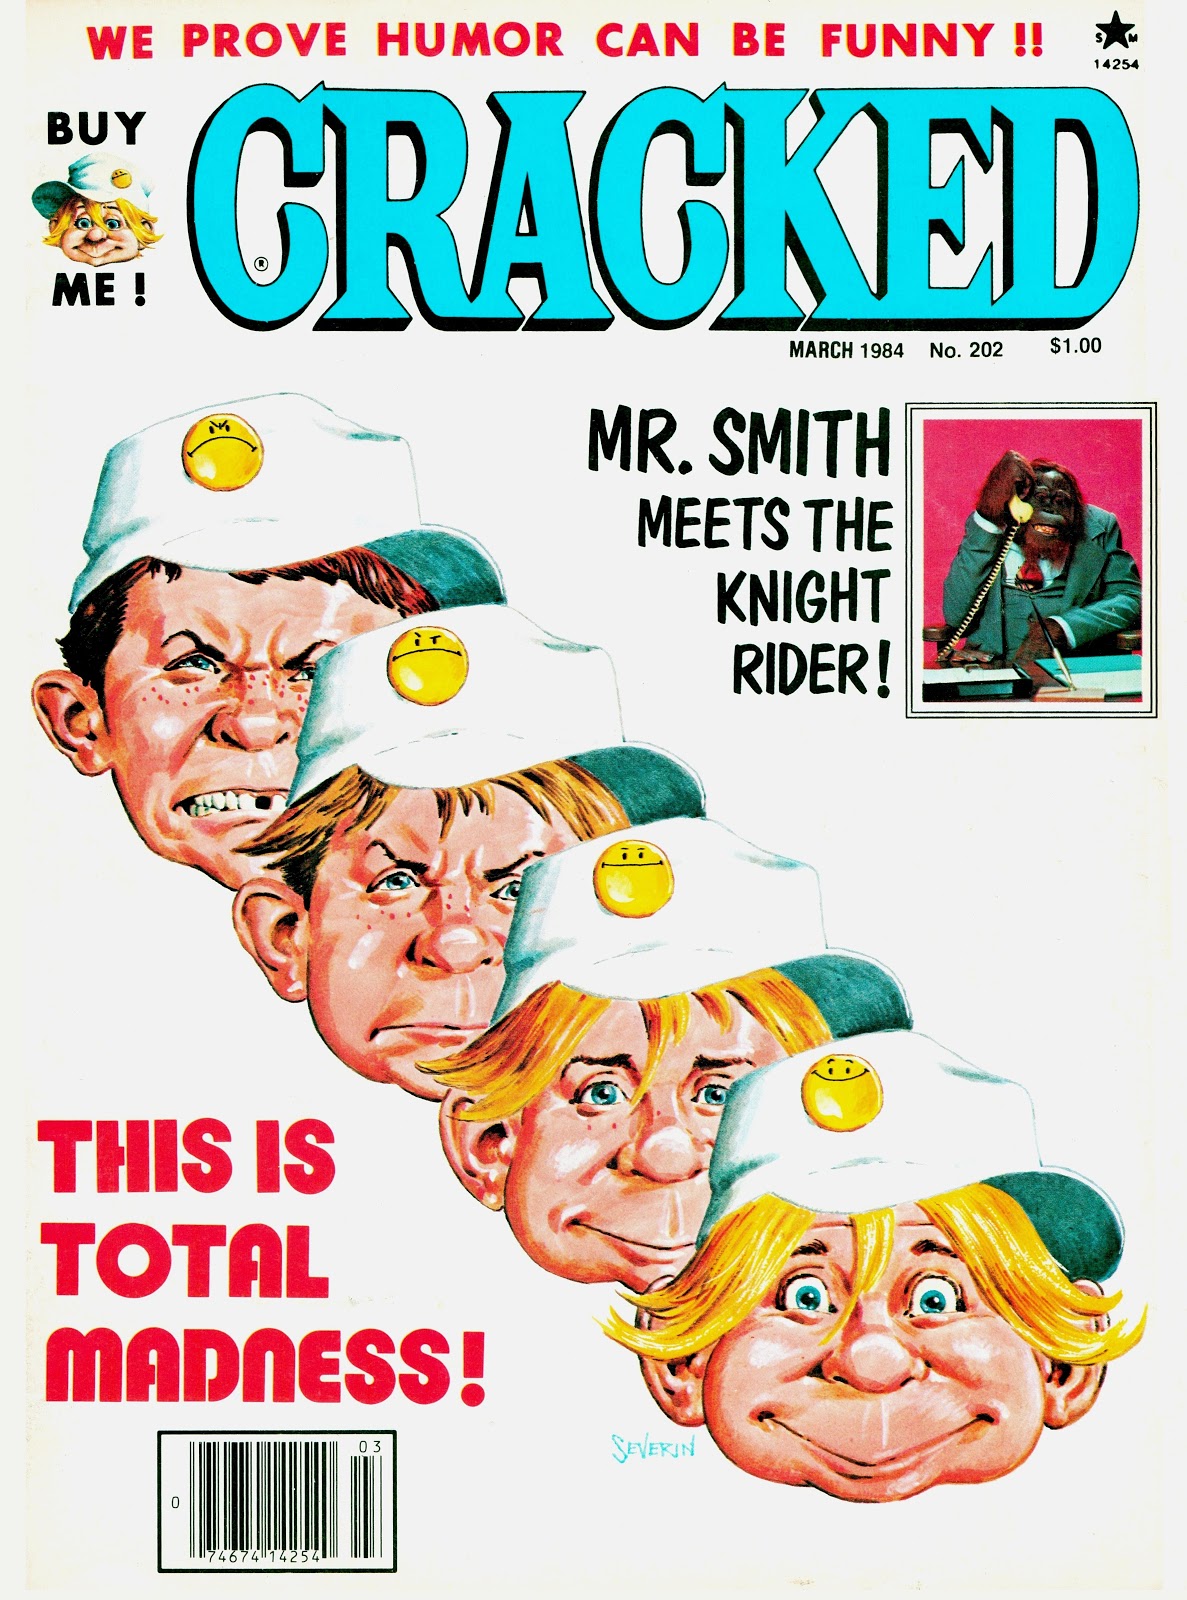 random pic cracked magazine alfred e neuman - We Prove Humor Can Be Funny !! Crackedd No 2021.00 Mr. Smith Meets The Knight Rider! This Is Total Madness!